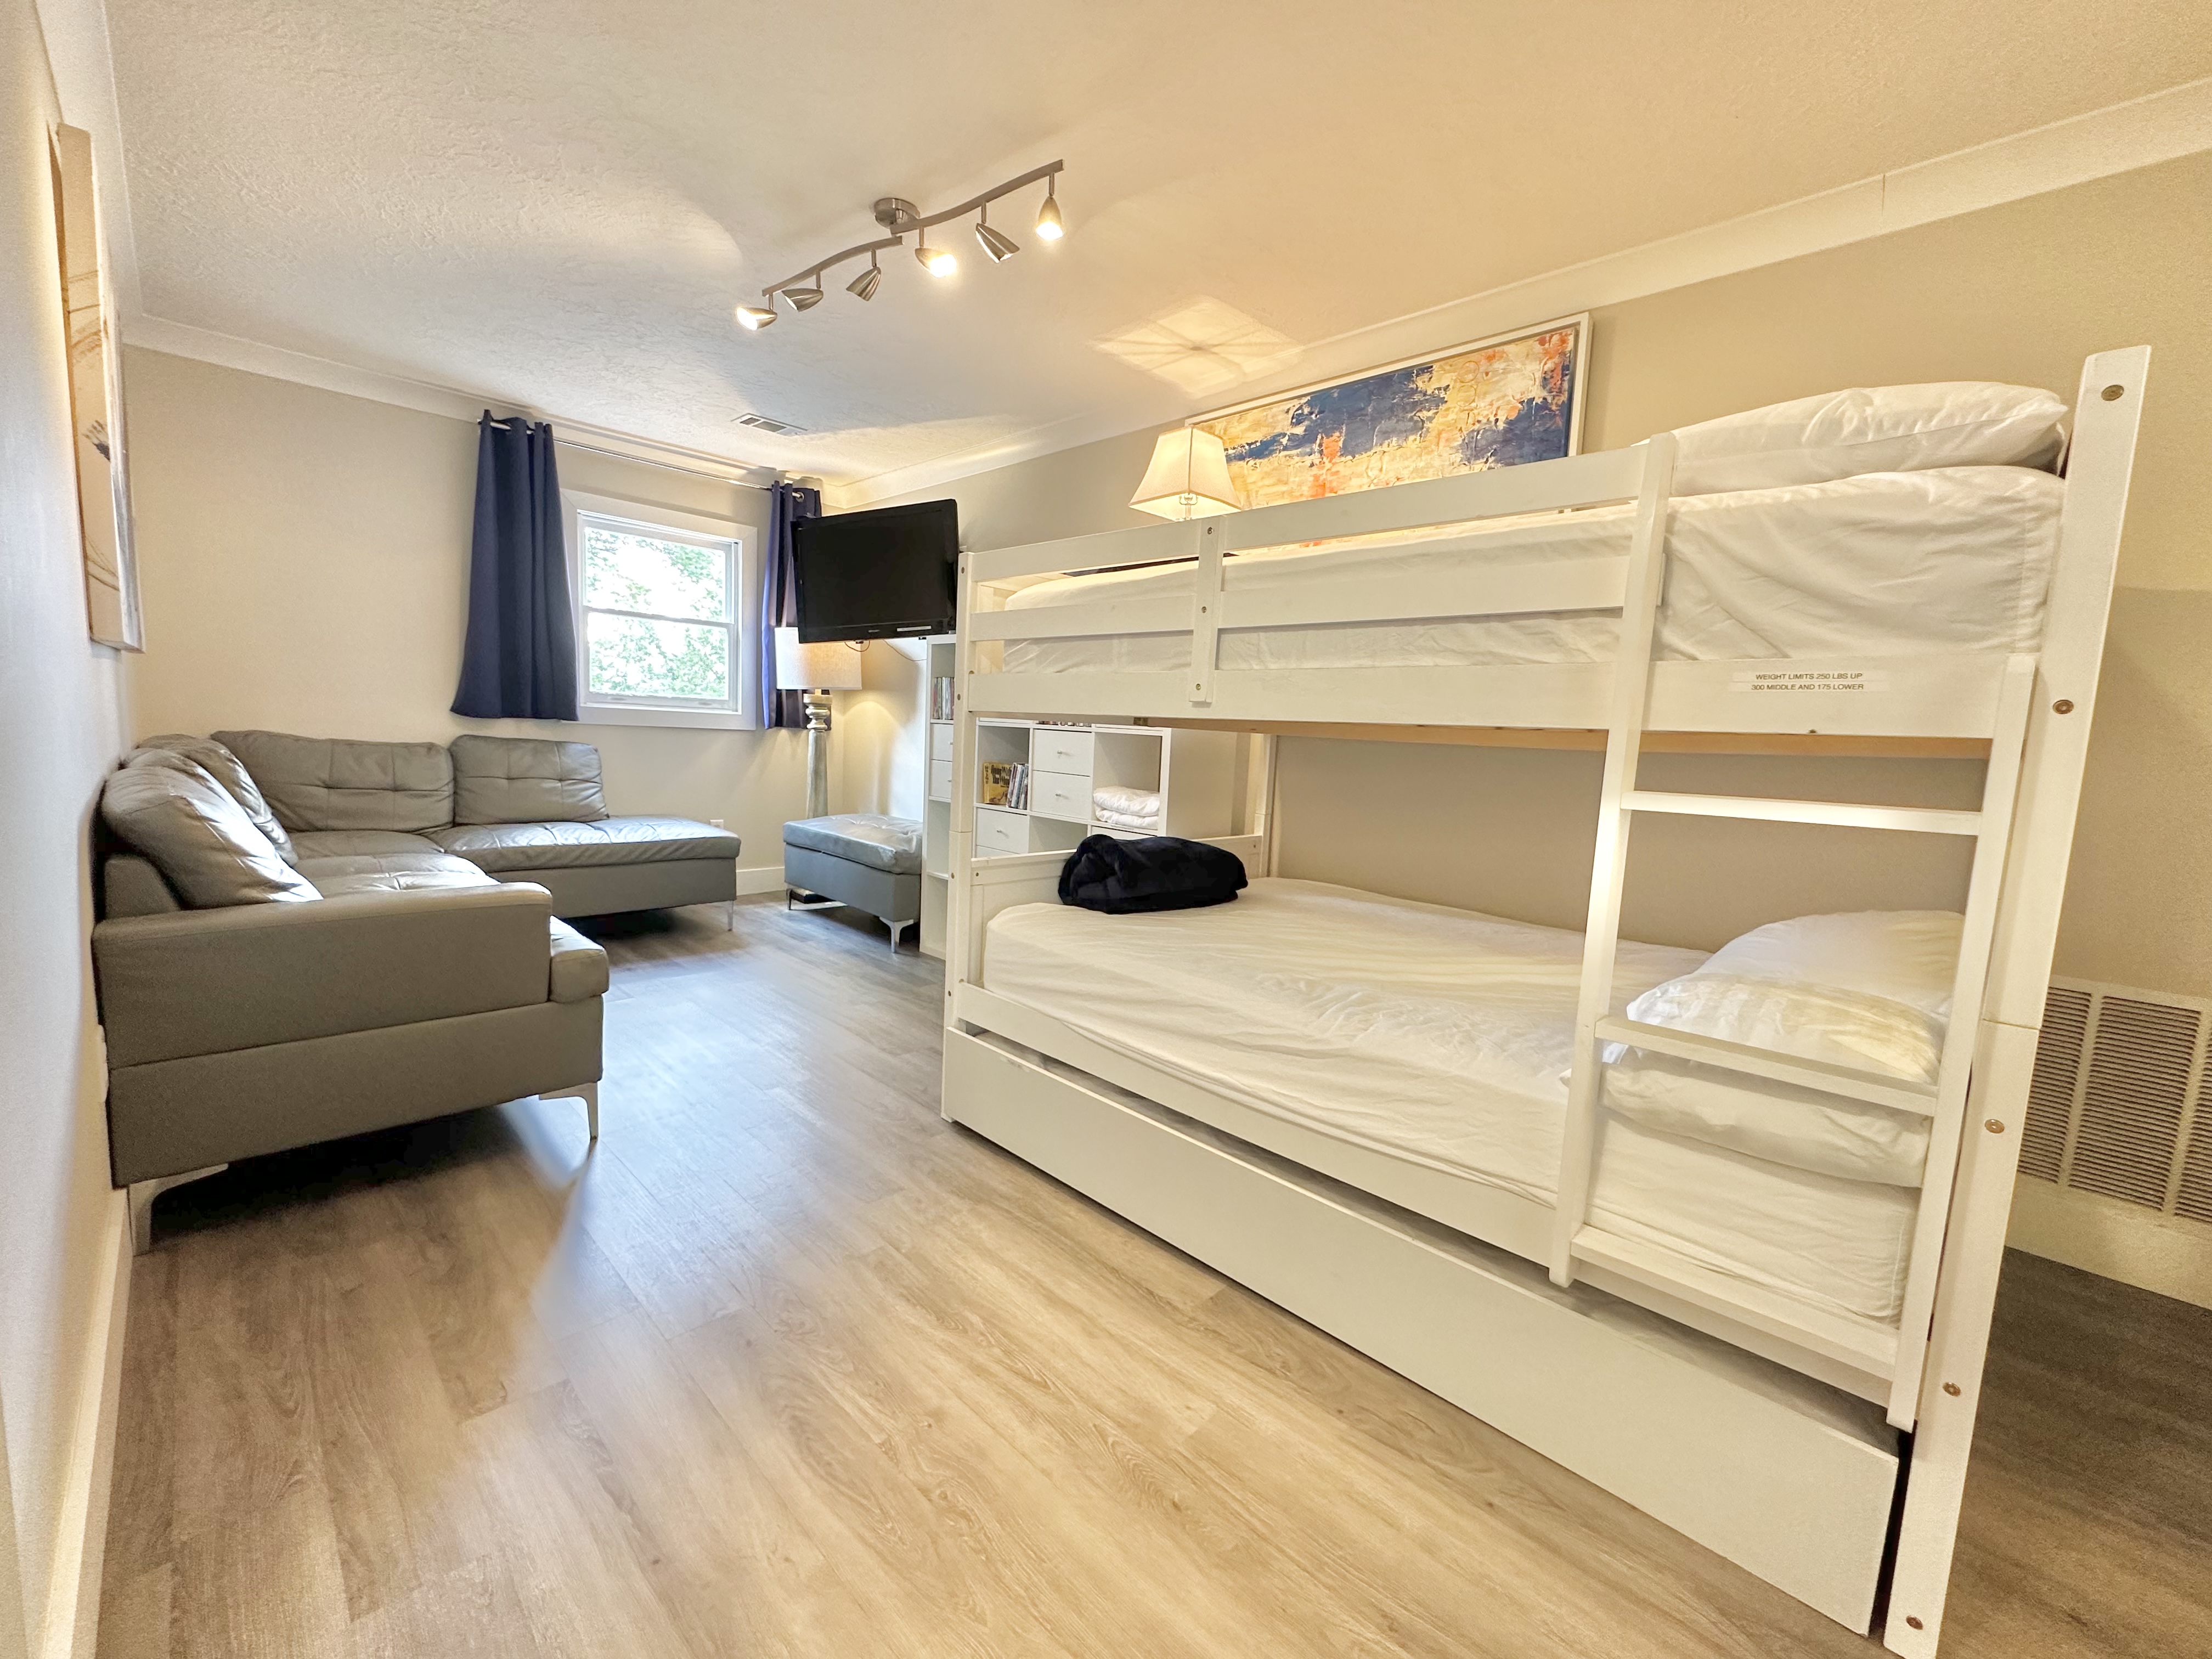 The Loft (Sleeps 5). Double bunk bed with twin trundle underneath.